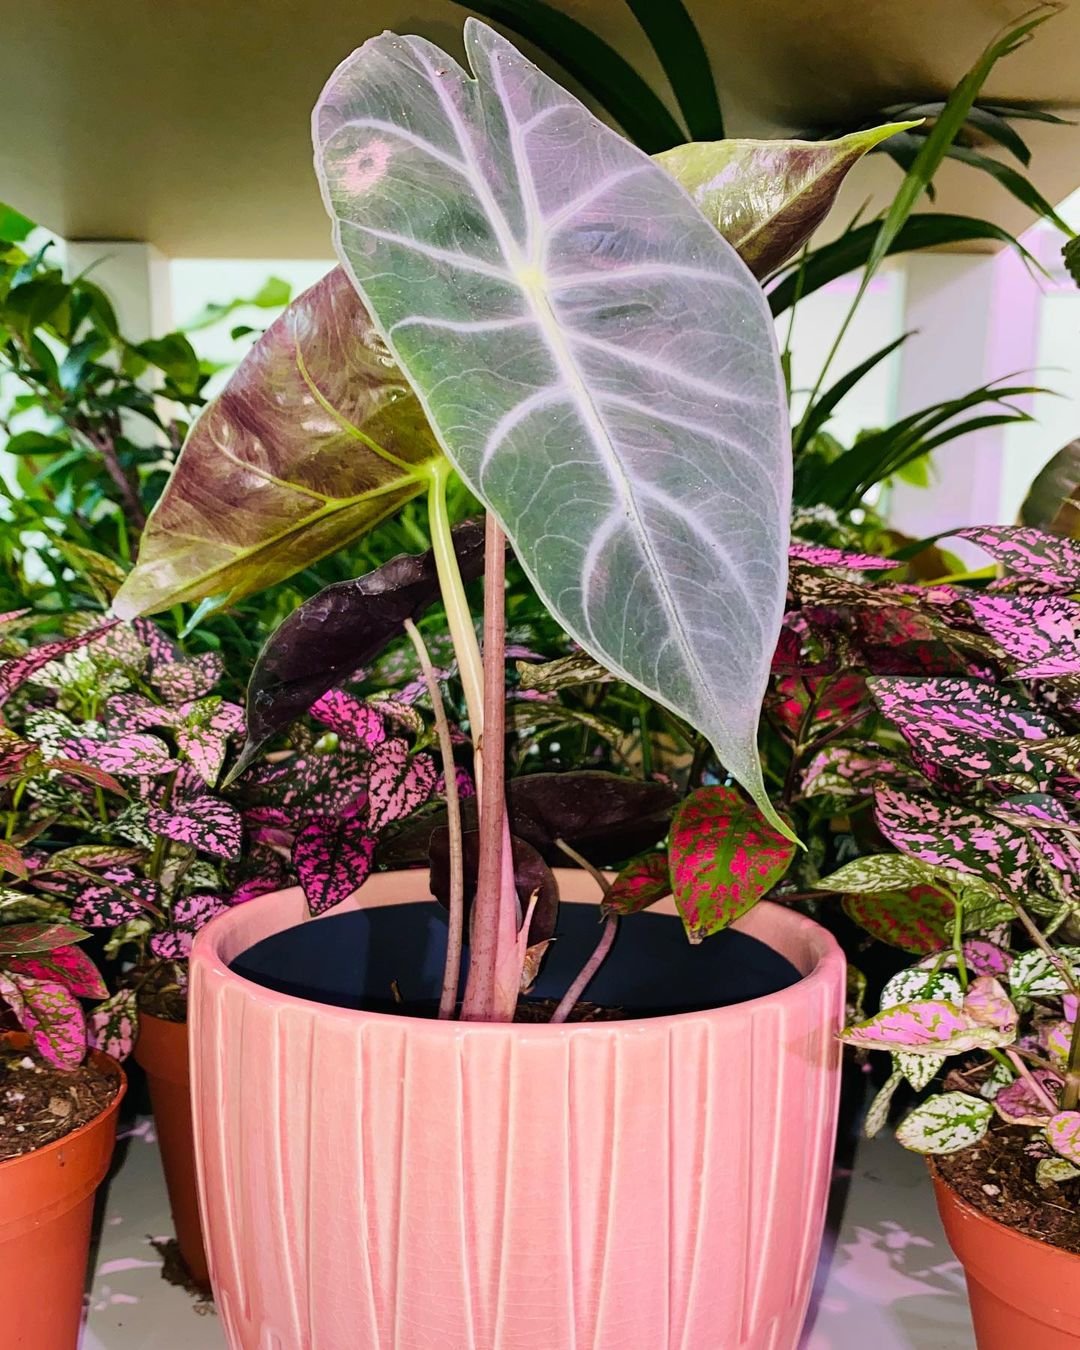 A close-up photo of a Pink Dragon Alocasia plant with large, heart-shaped leaves in shades of pink and green.

